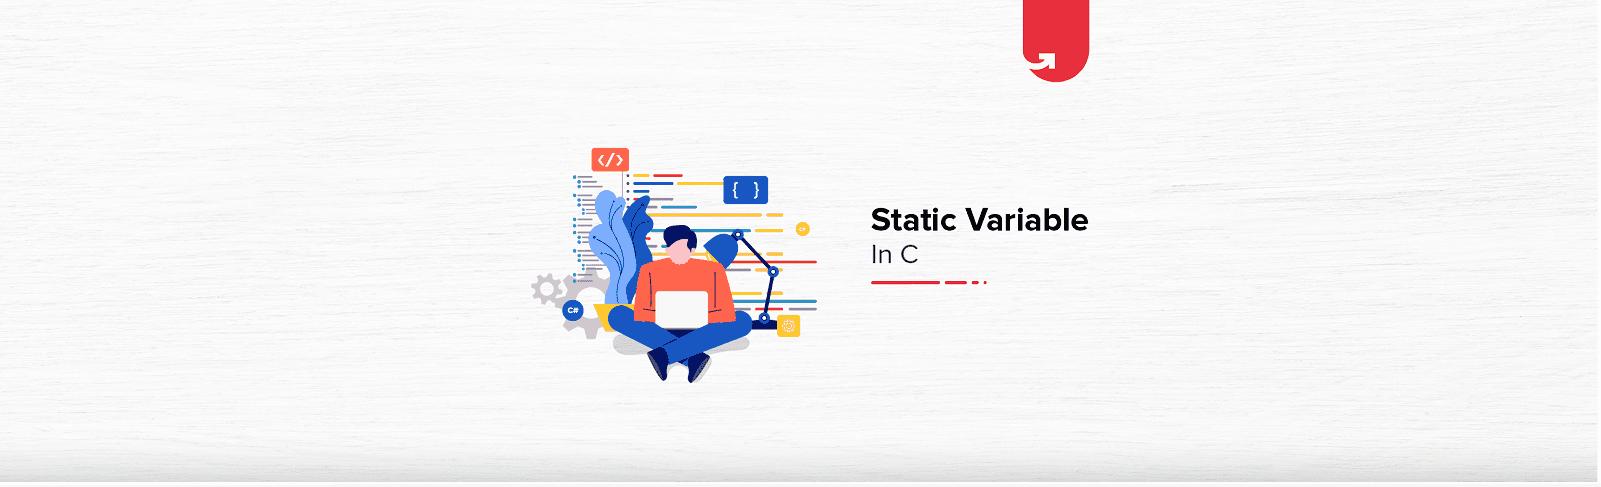 Learn About Static Variable in C [With Coding Example]